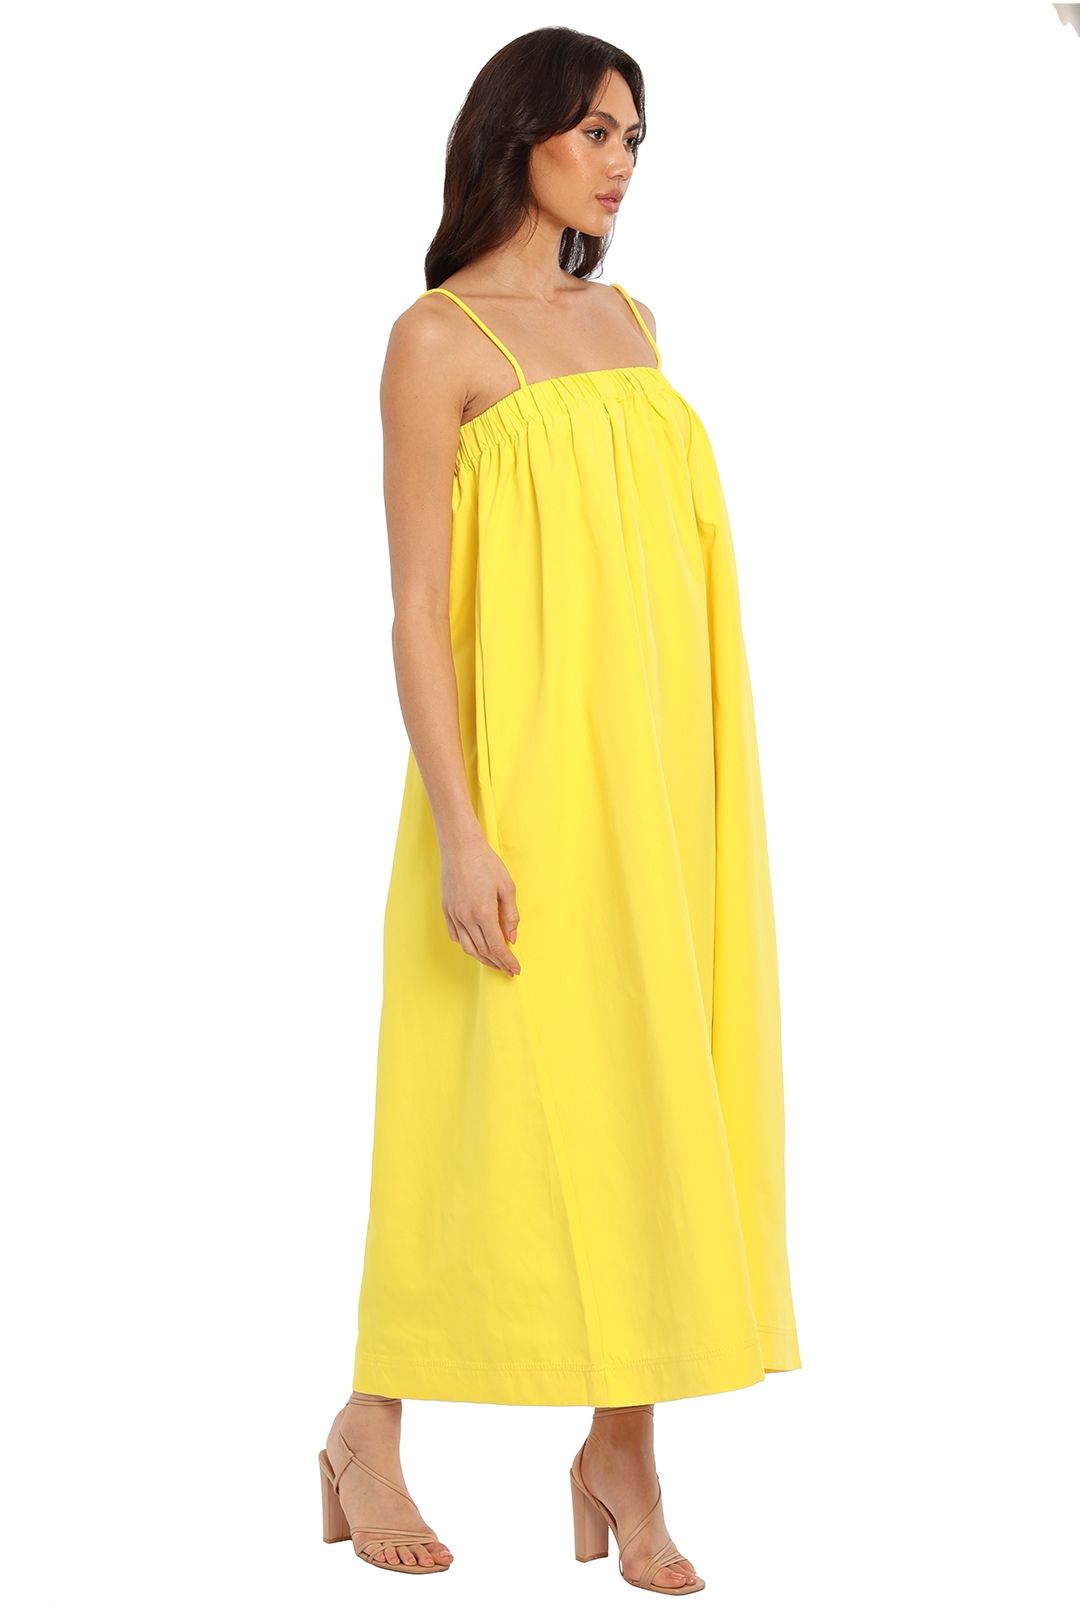 By Johnny Becca Maxi Yellow